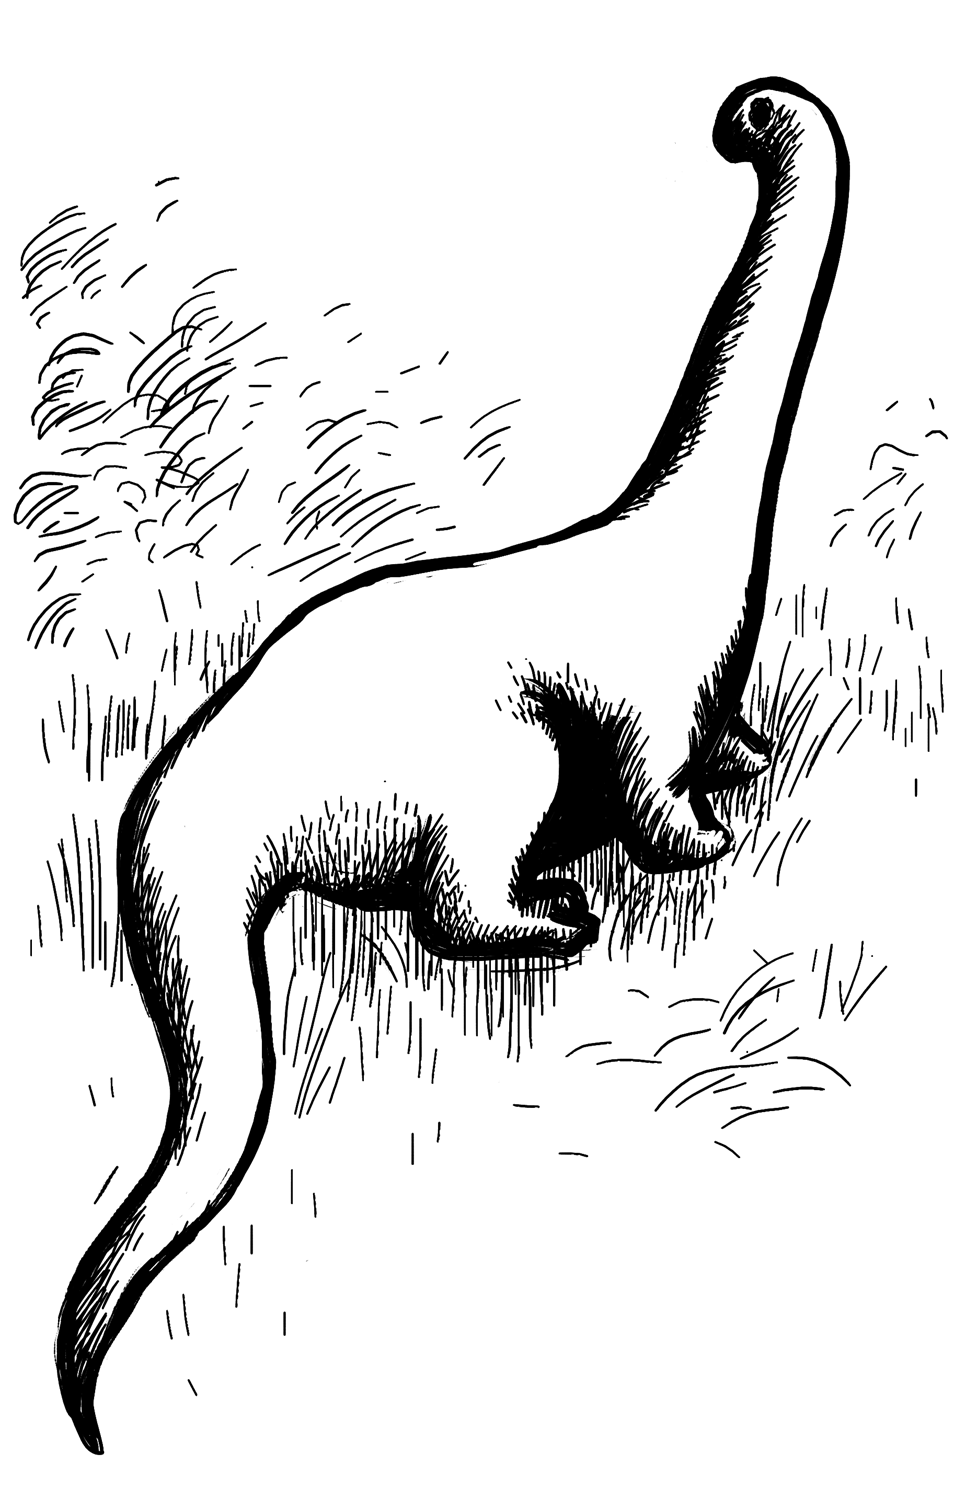 The Mokele-Mbembe: Searching For The Congo Dinosaur